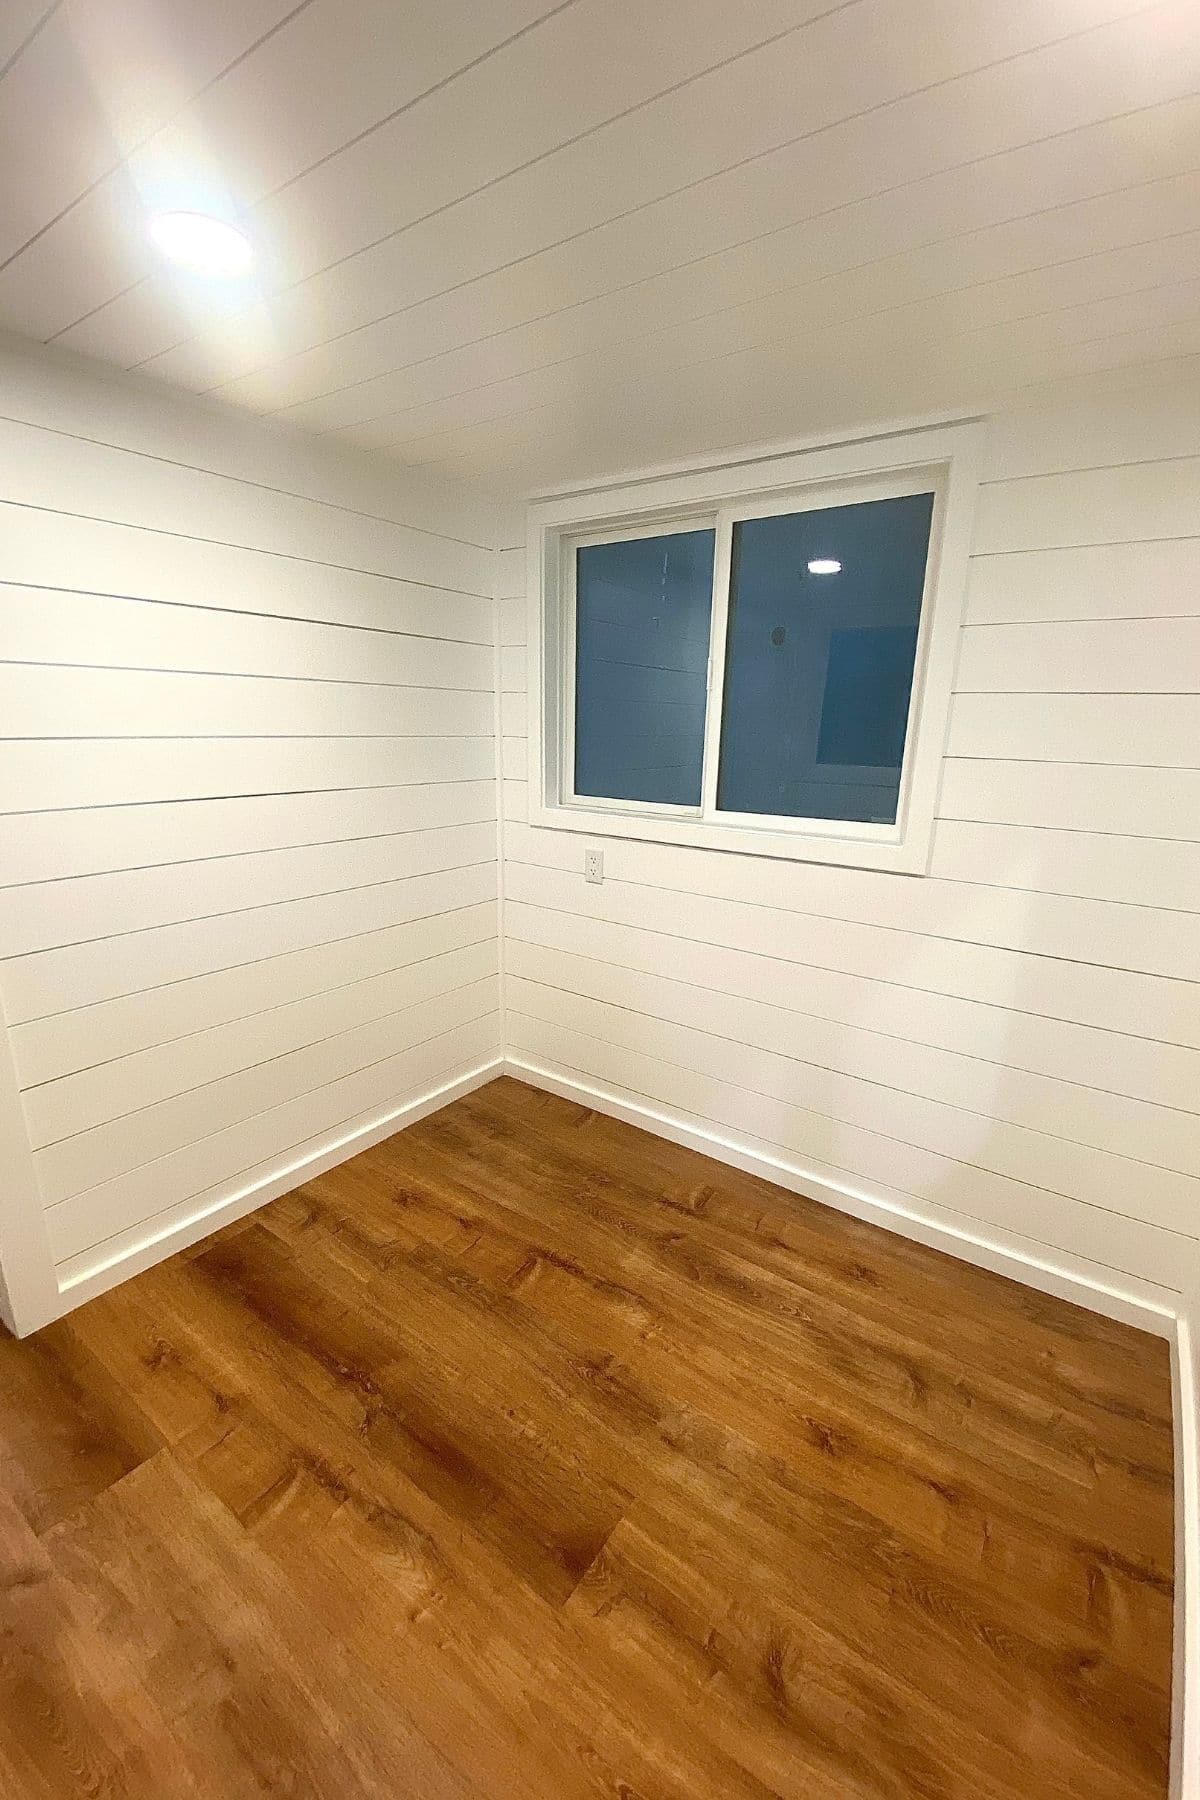 living room with white shiplap walls a single window and wood floors